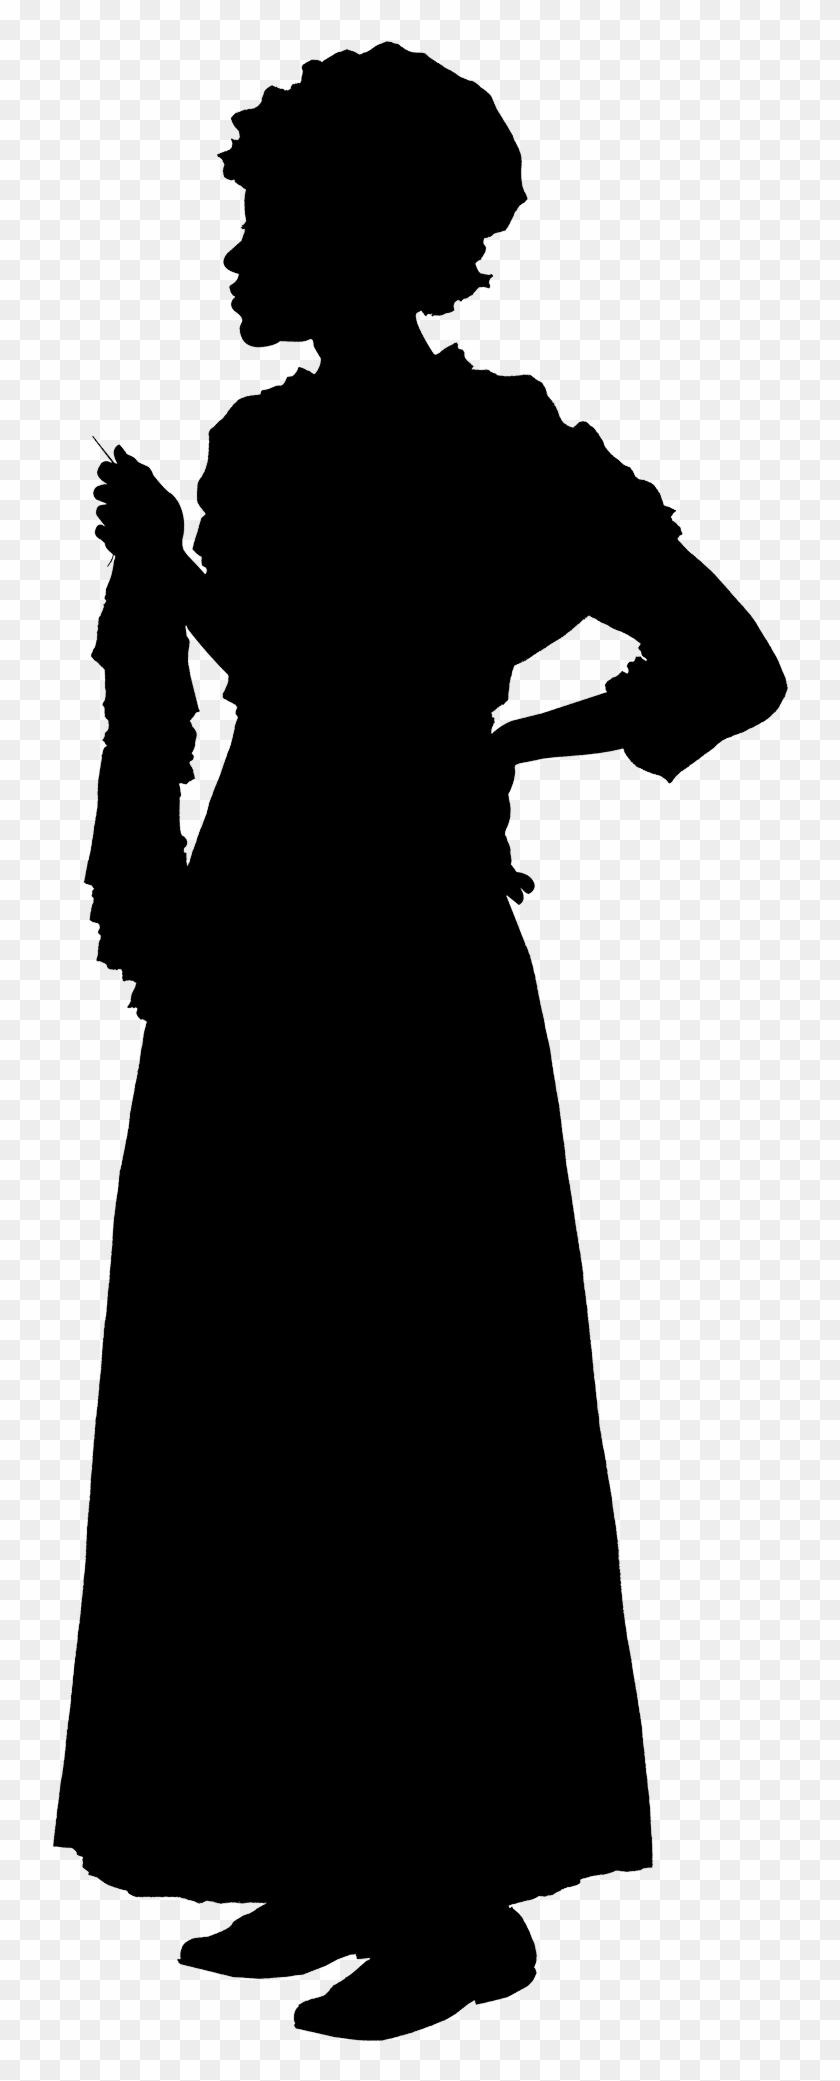 Silhouette Of Ona Judge 19th Century Woman Silhouette Hd Png Download 1330x20001429241